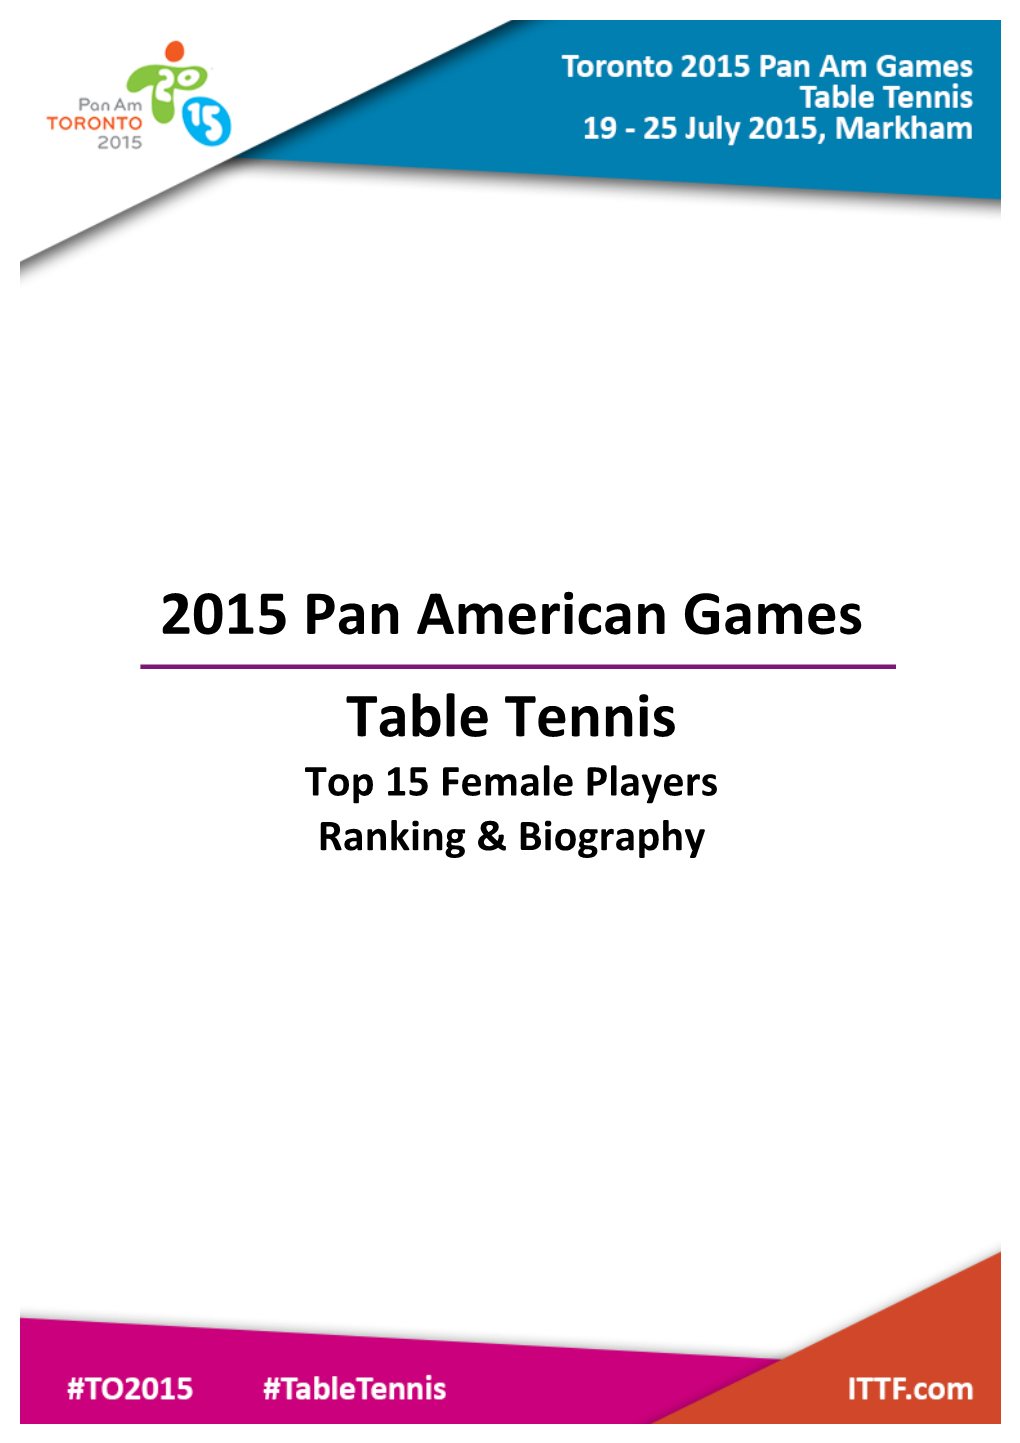 2015 Pan American Games Table Tennis Top 15 Female Players Ranking & Biography